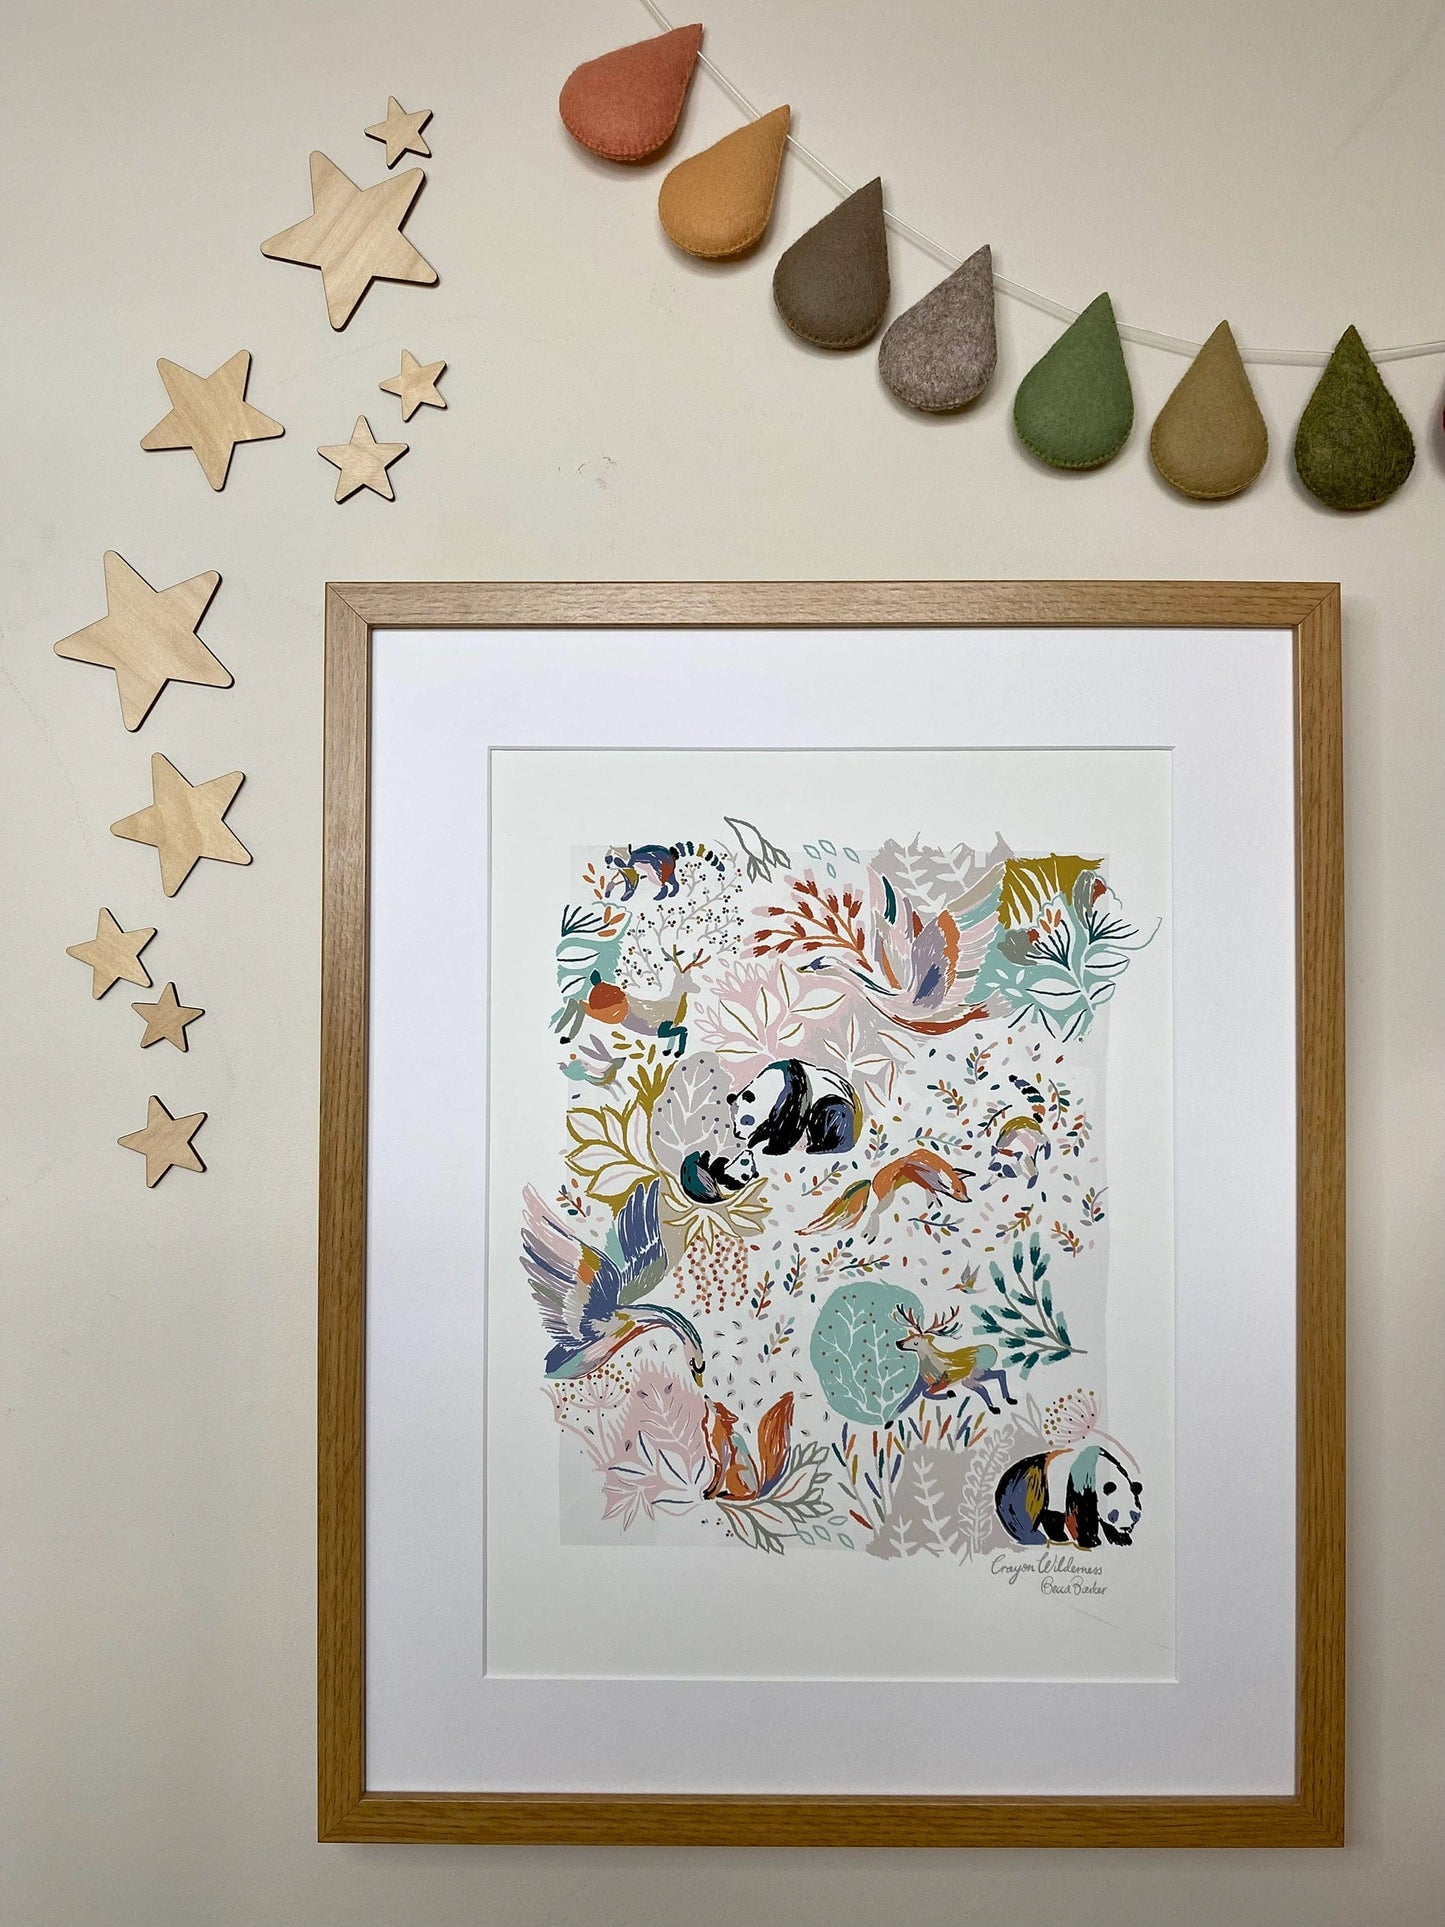 Our Crayon Wilderness art print in a dark oak frame hung on a neutral wall, with rain drop bunting in autumnal hues, and wooden stars framing the hung art work. Our Crayon Wilderness Art print is hand-drawn with floral details in greens and pinks, with pop of brighter colours, with animals featuring pandas, swans, foxes, deer and raccoons, creating a whimsical woodland feel.